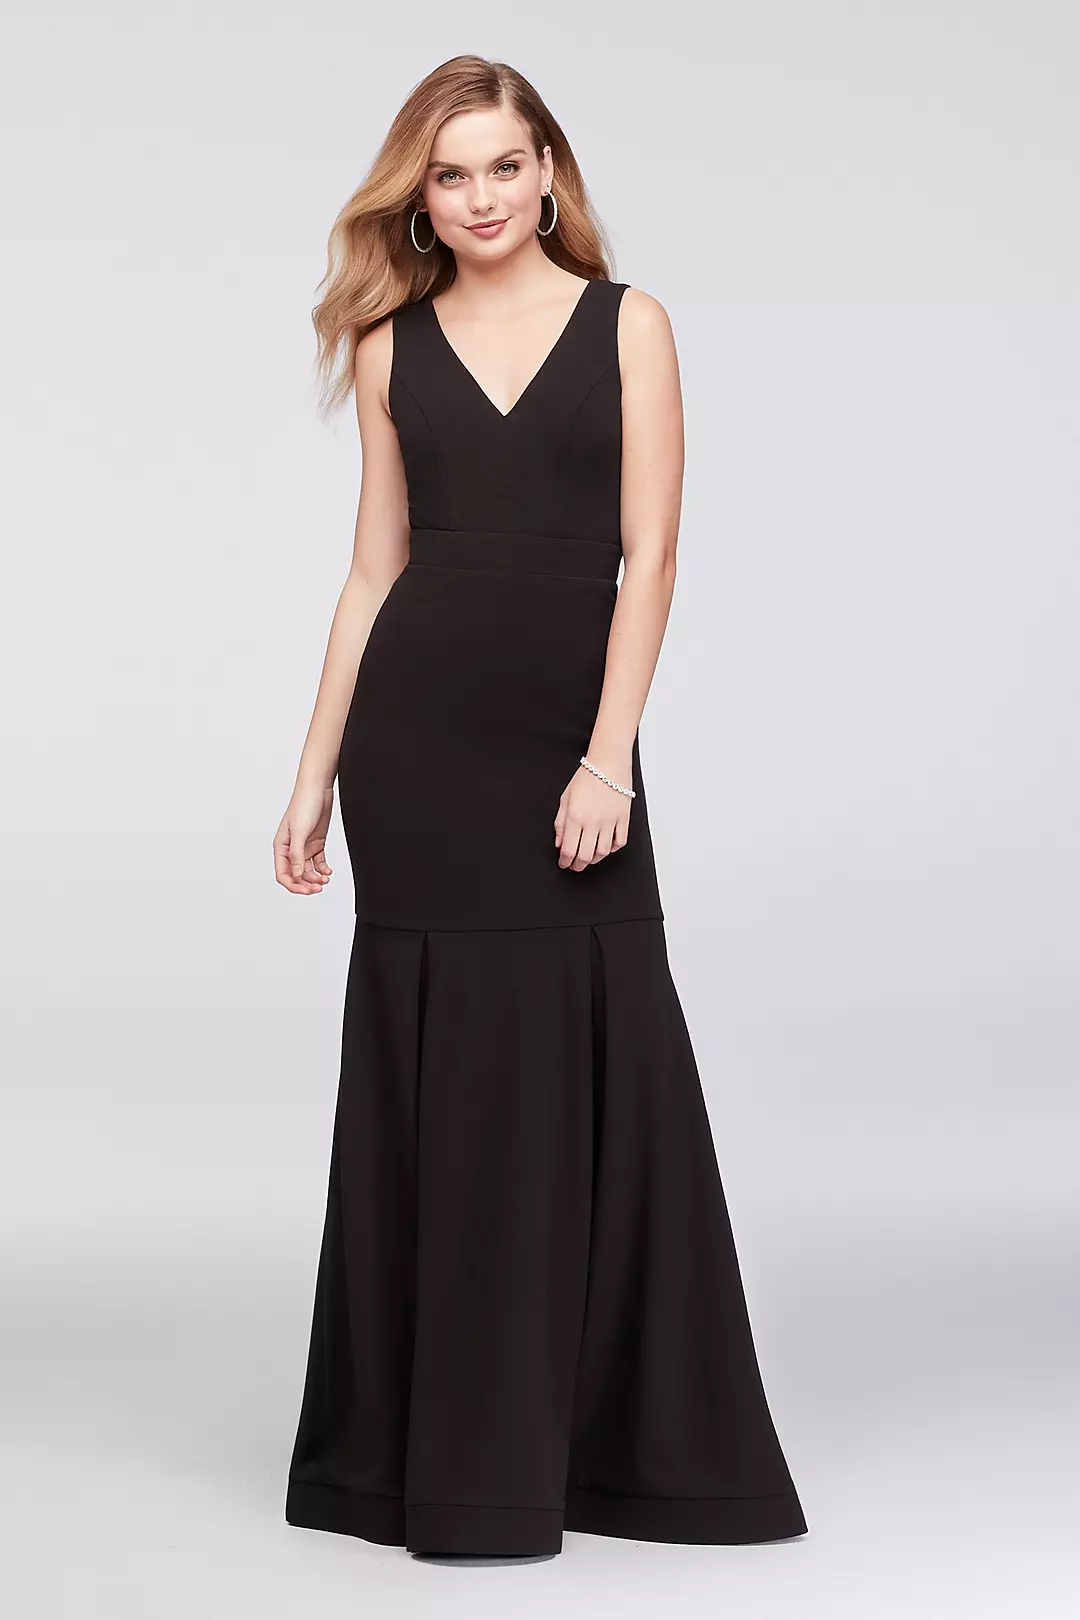 Box Pleated Crepe Mermaid Gown with Back Strap  Image